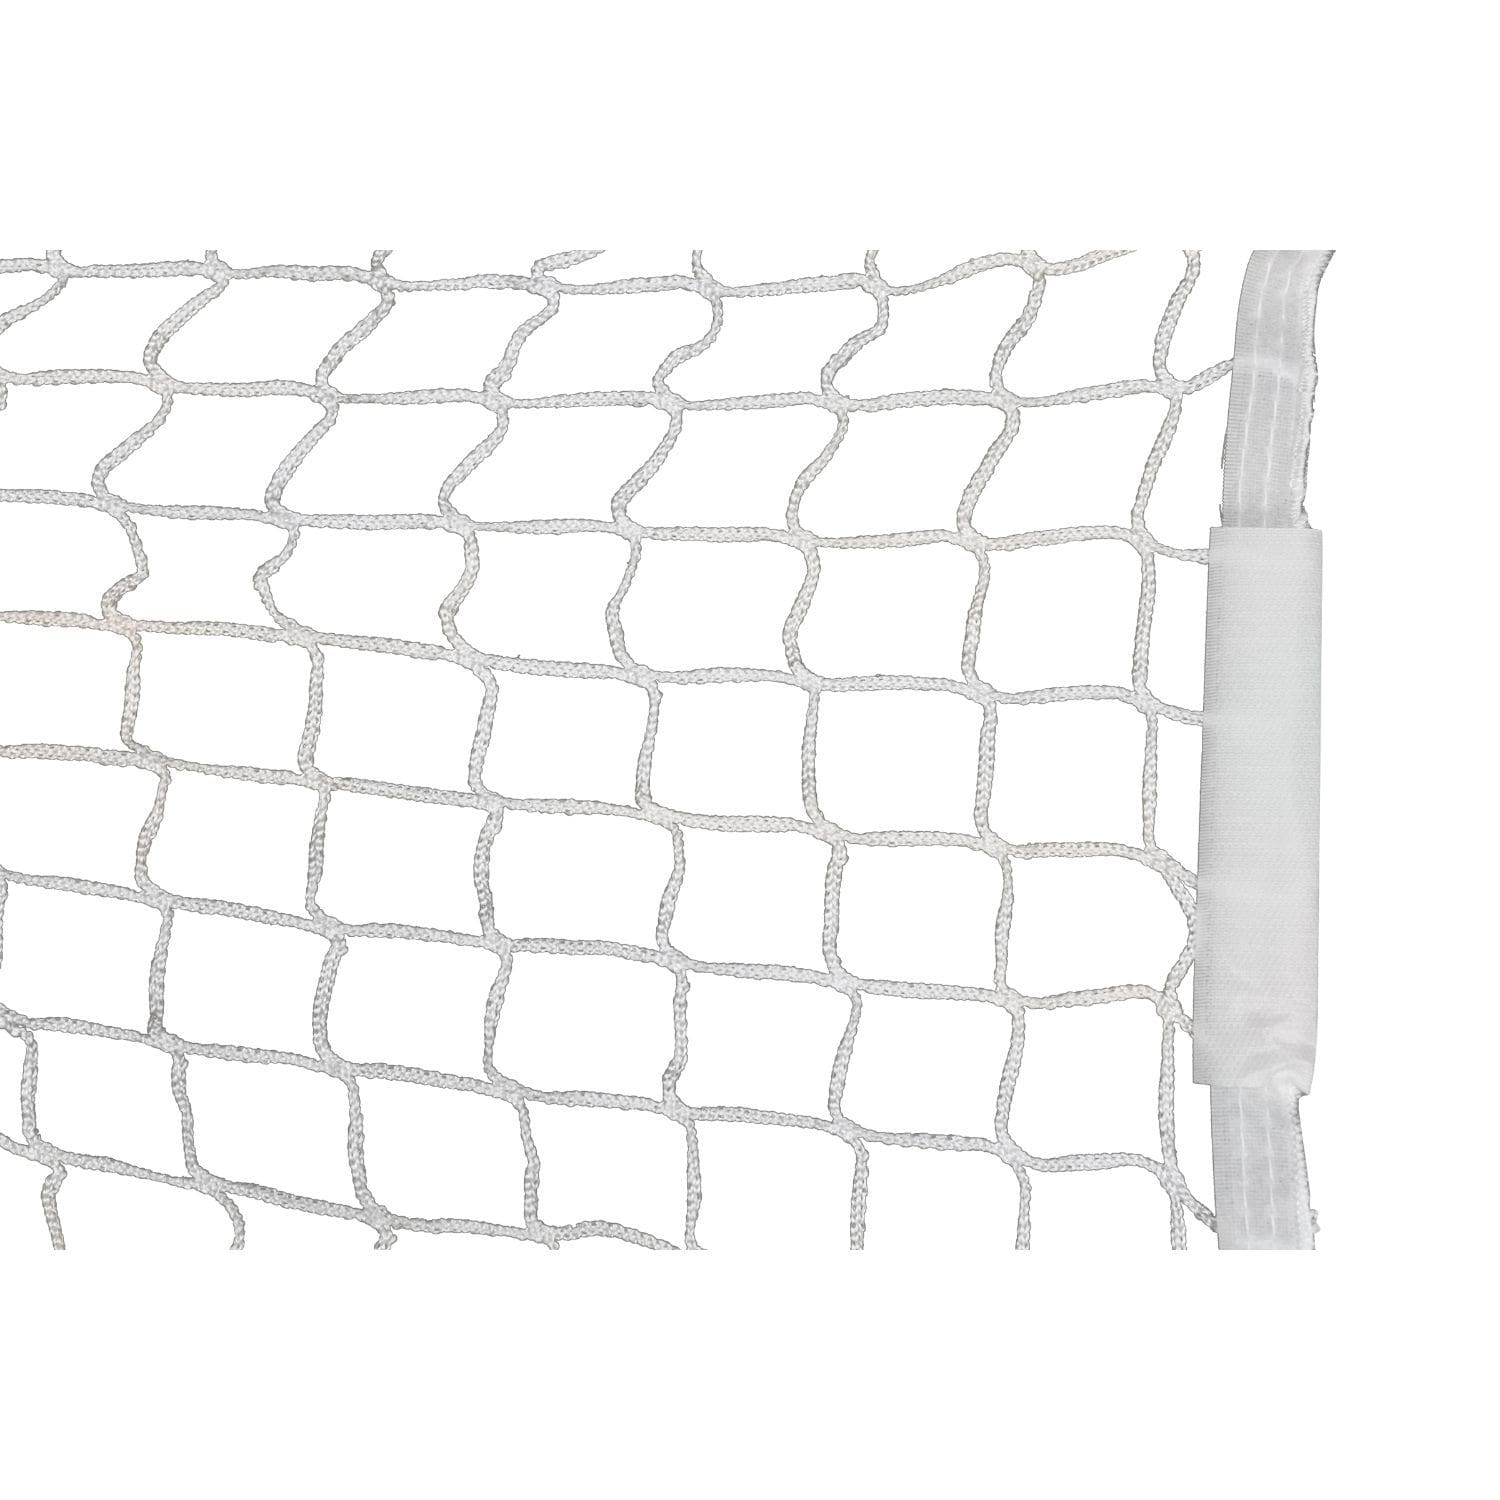 Champro Sports : Fitness Champro Replacement Hockey Net 72in x 48in